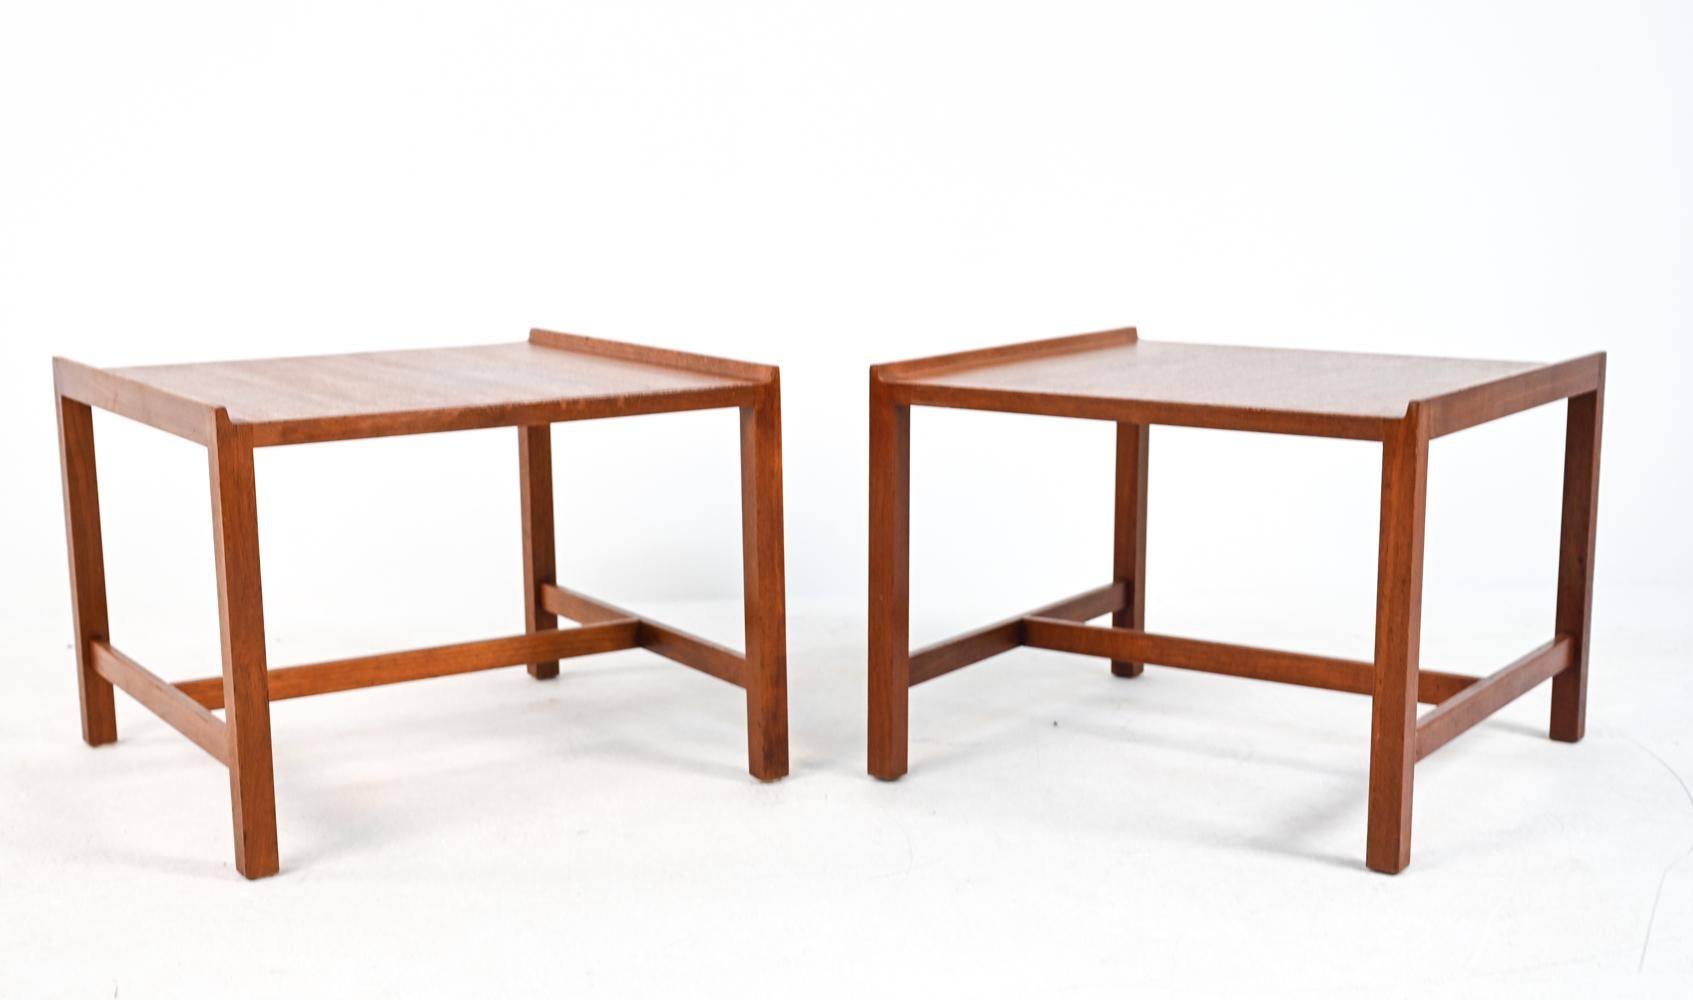 A handsome pair of Danish mid-century side tables in teak wood, with a clean, minimalist design by Illums Bolighus.